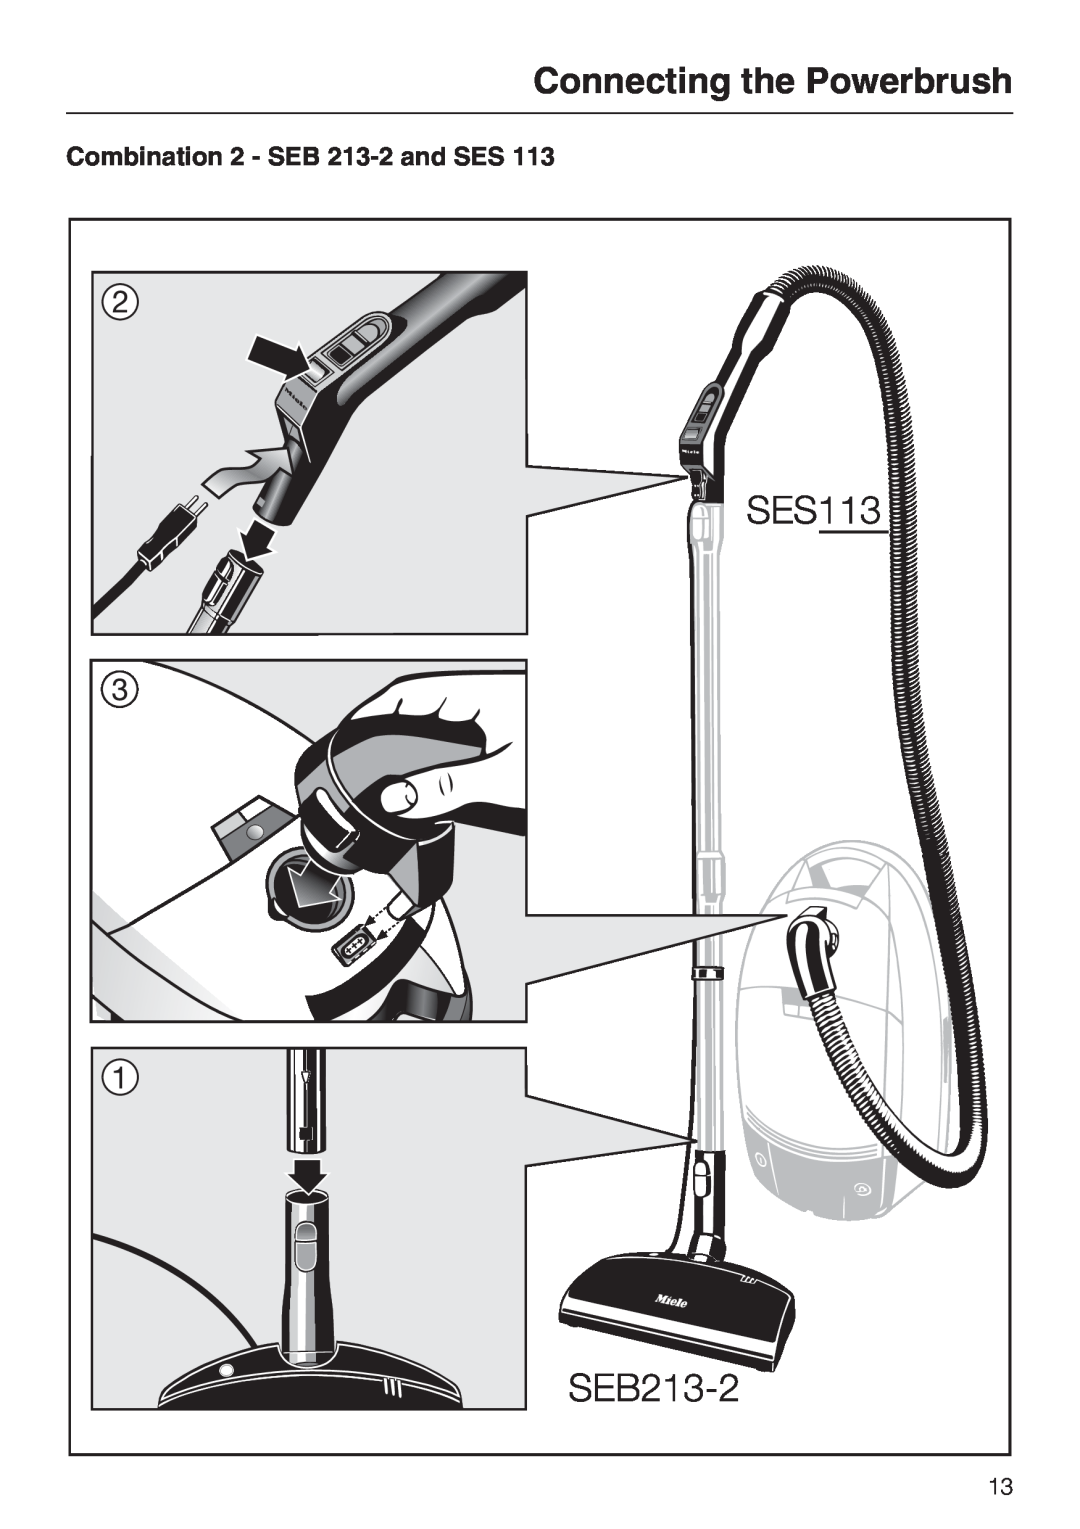 Miele 217-2, 217-3 operating instructions Connecting the Powerbrush, Combination 2 - SEB 213-2and SES 